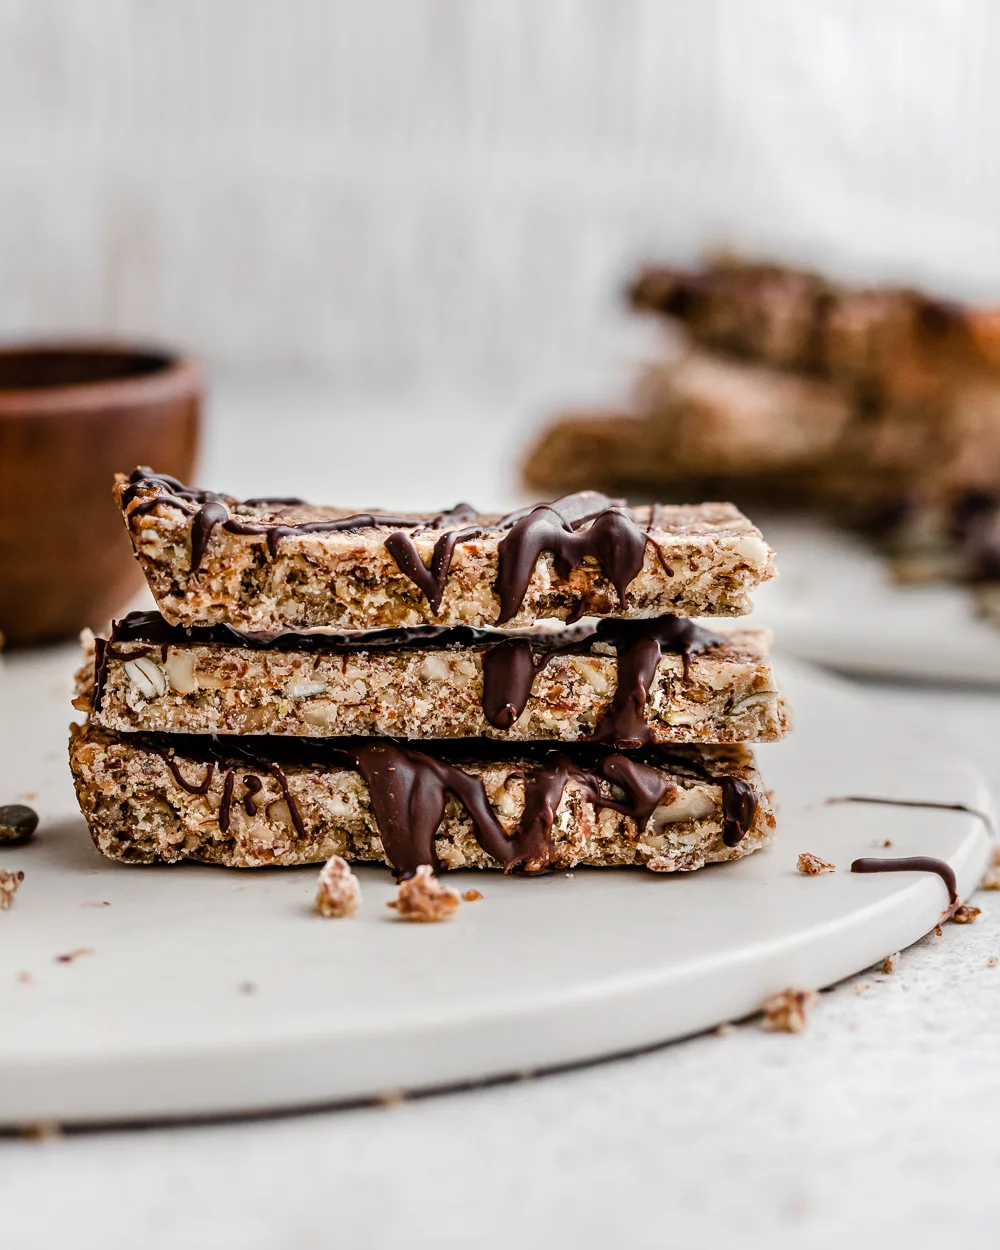 A stack of sliced granola bars with a chocolate drizzle